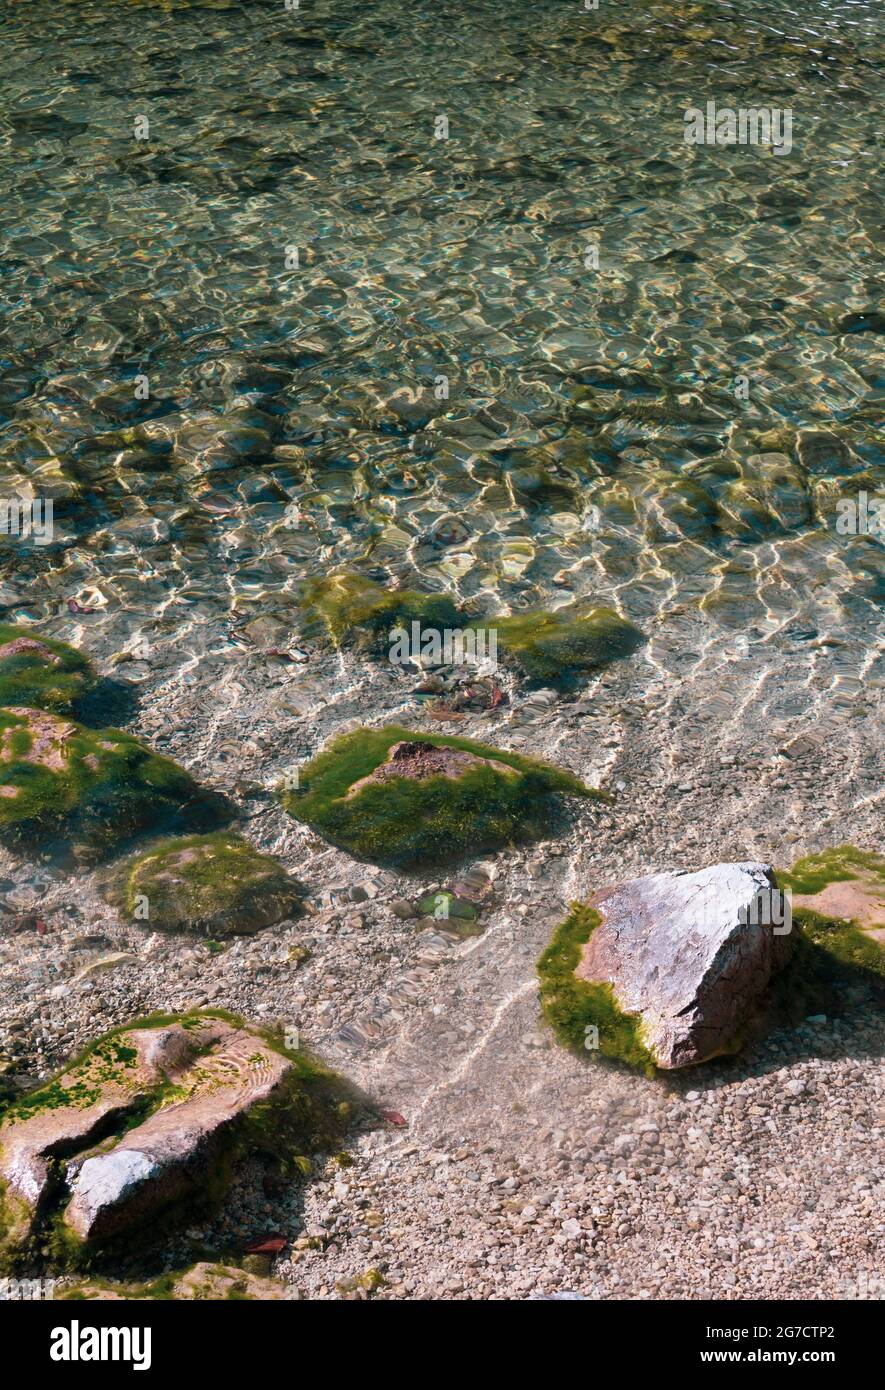 Clear water and stones at Königssee in Bavaria, Germany Stock Photo